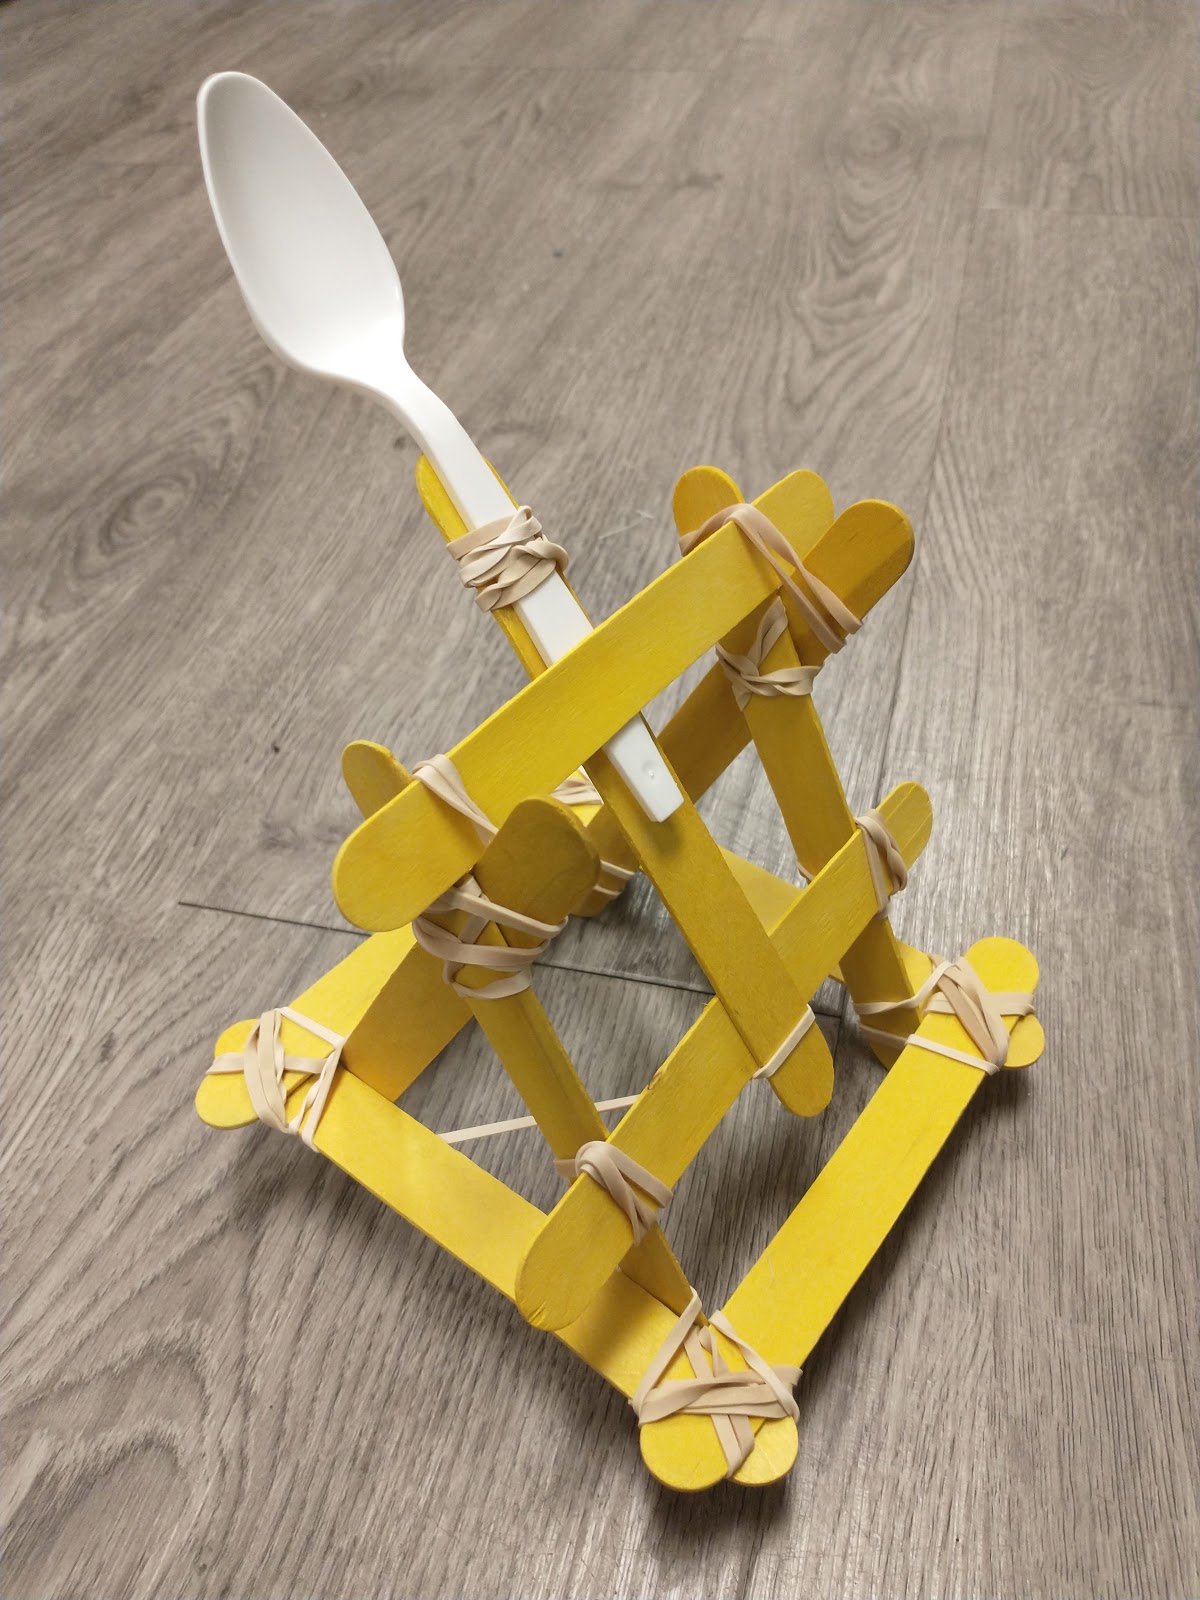 catapult design out of popsicle sticks cube